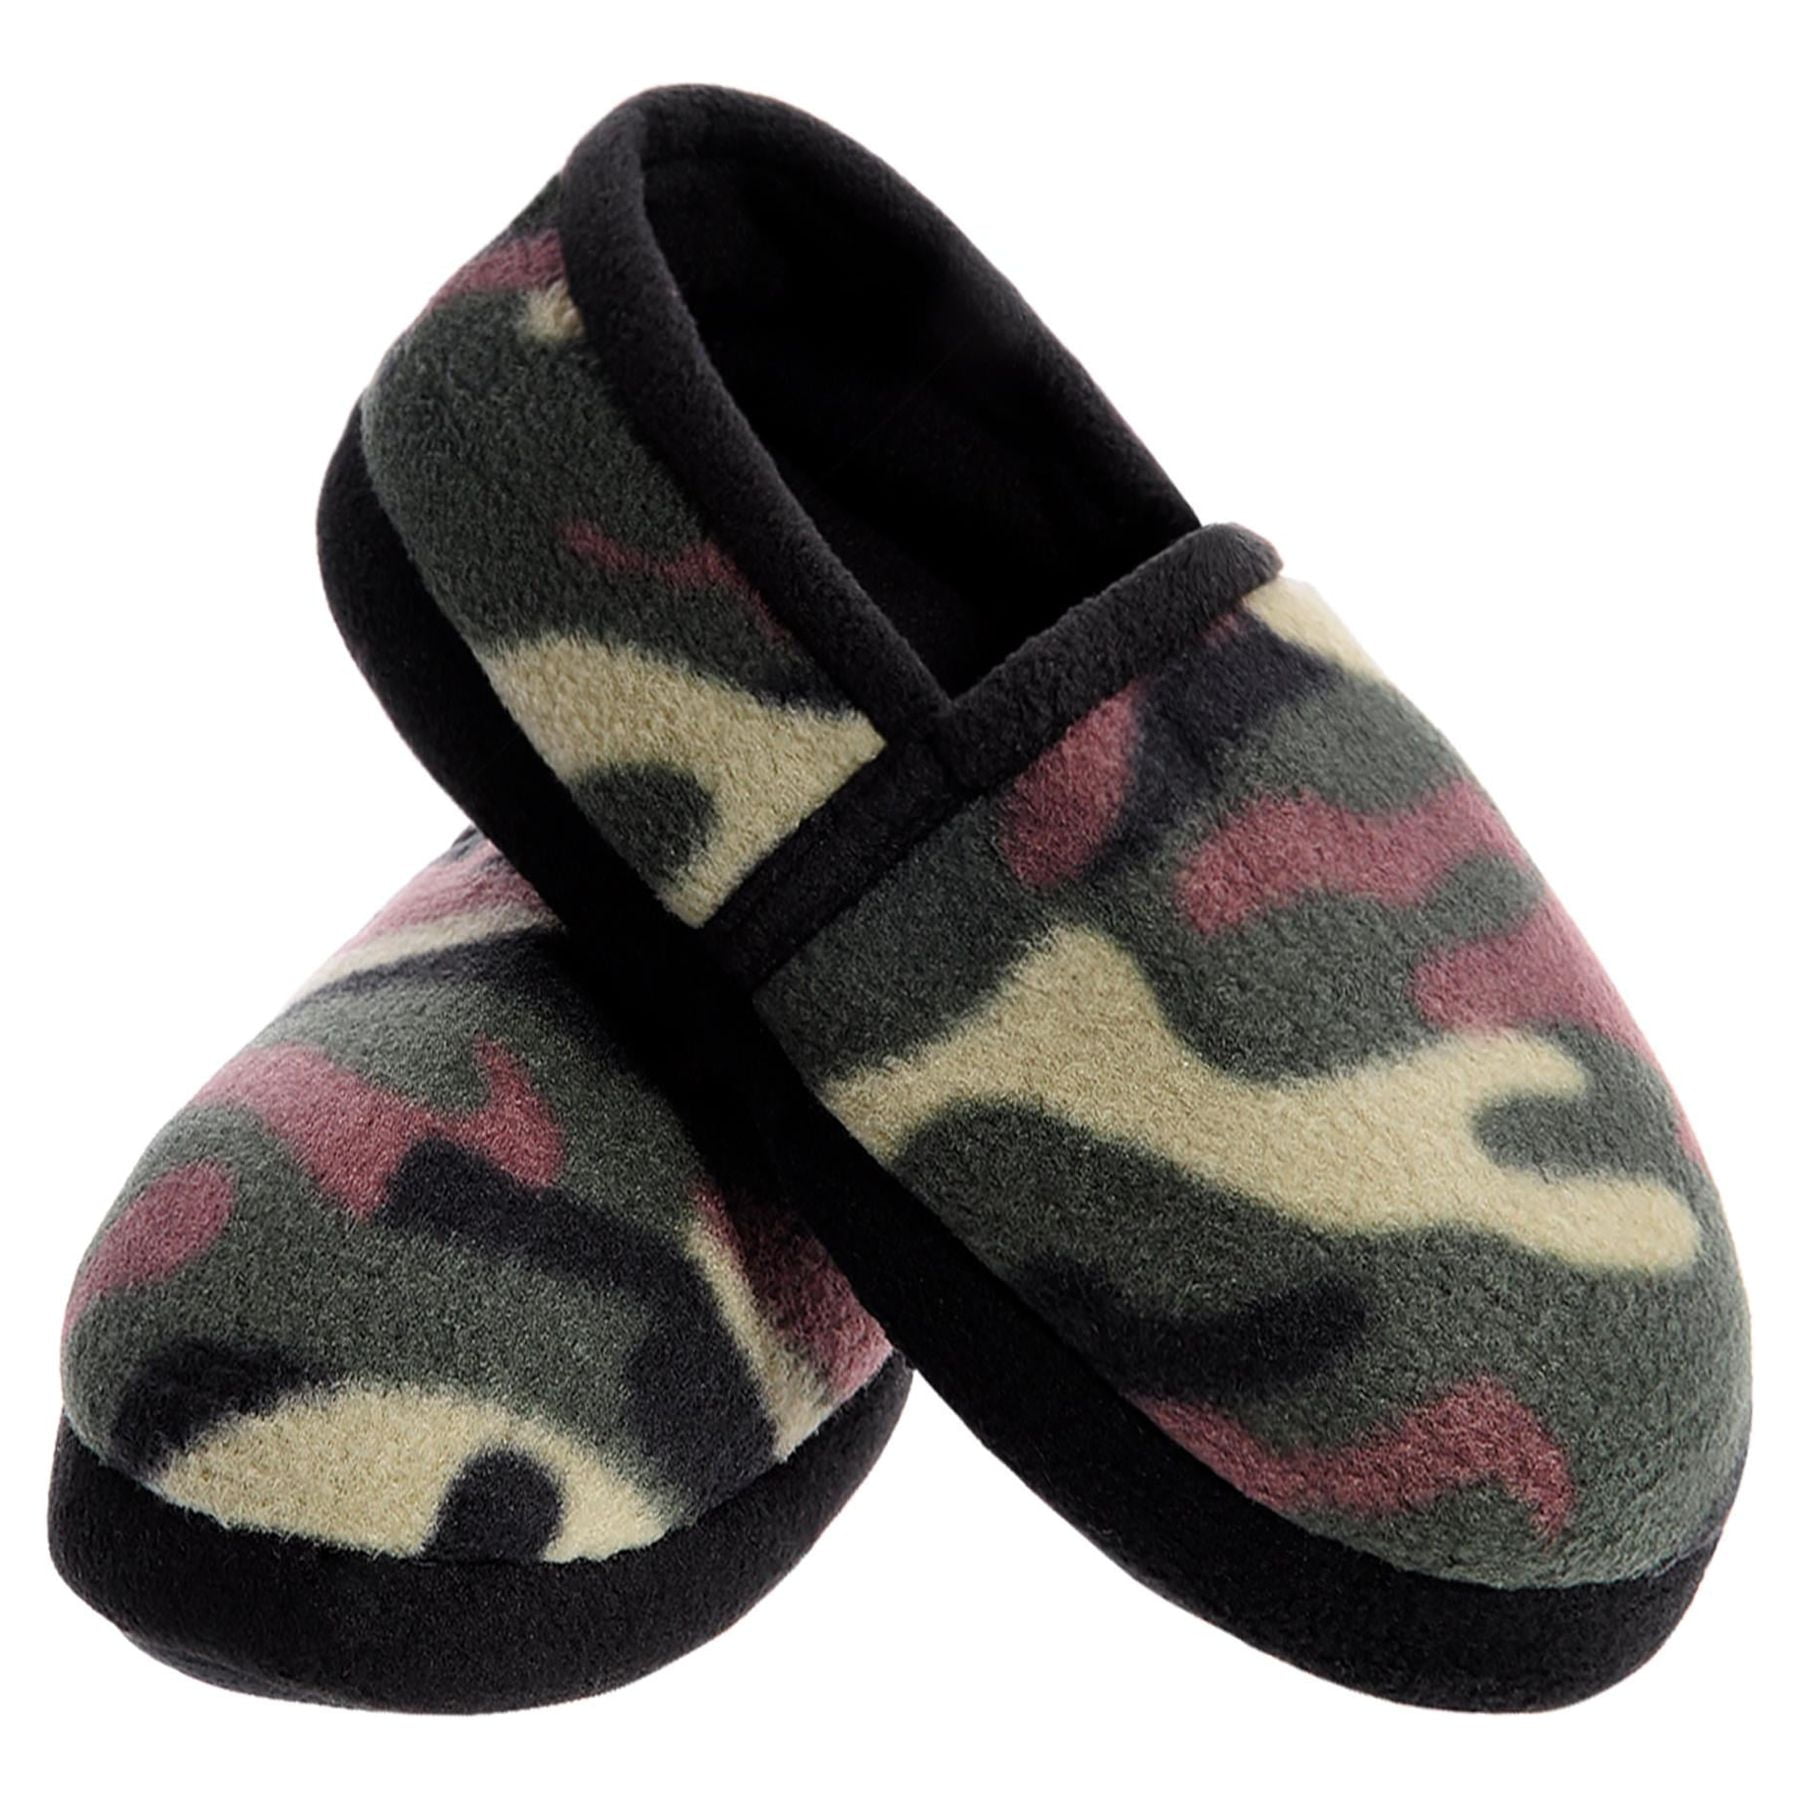 HOMEHOT Camo Boys Slippers for Kids House Shoes Cozy Memory Foam ...